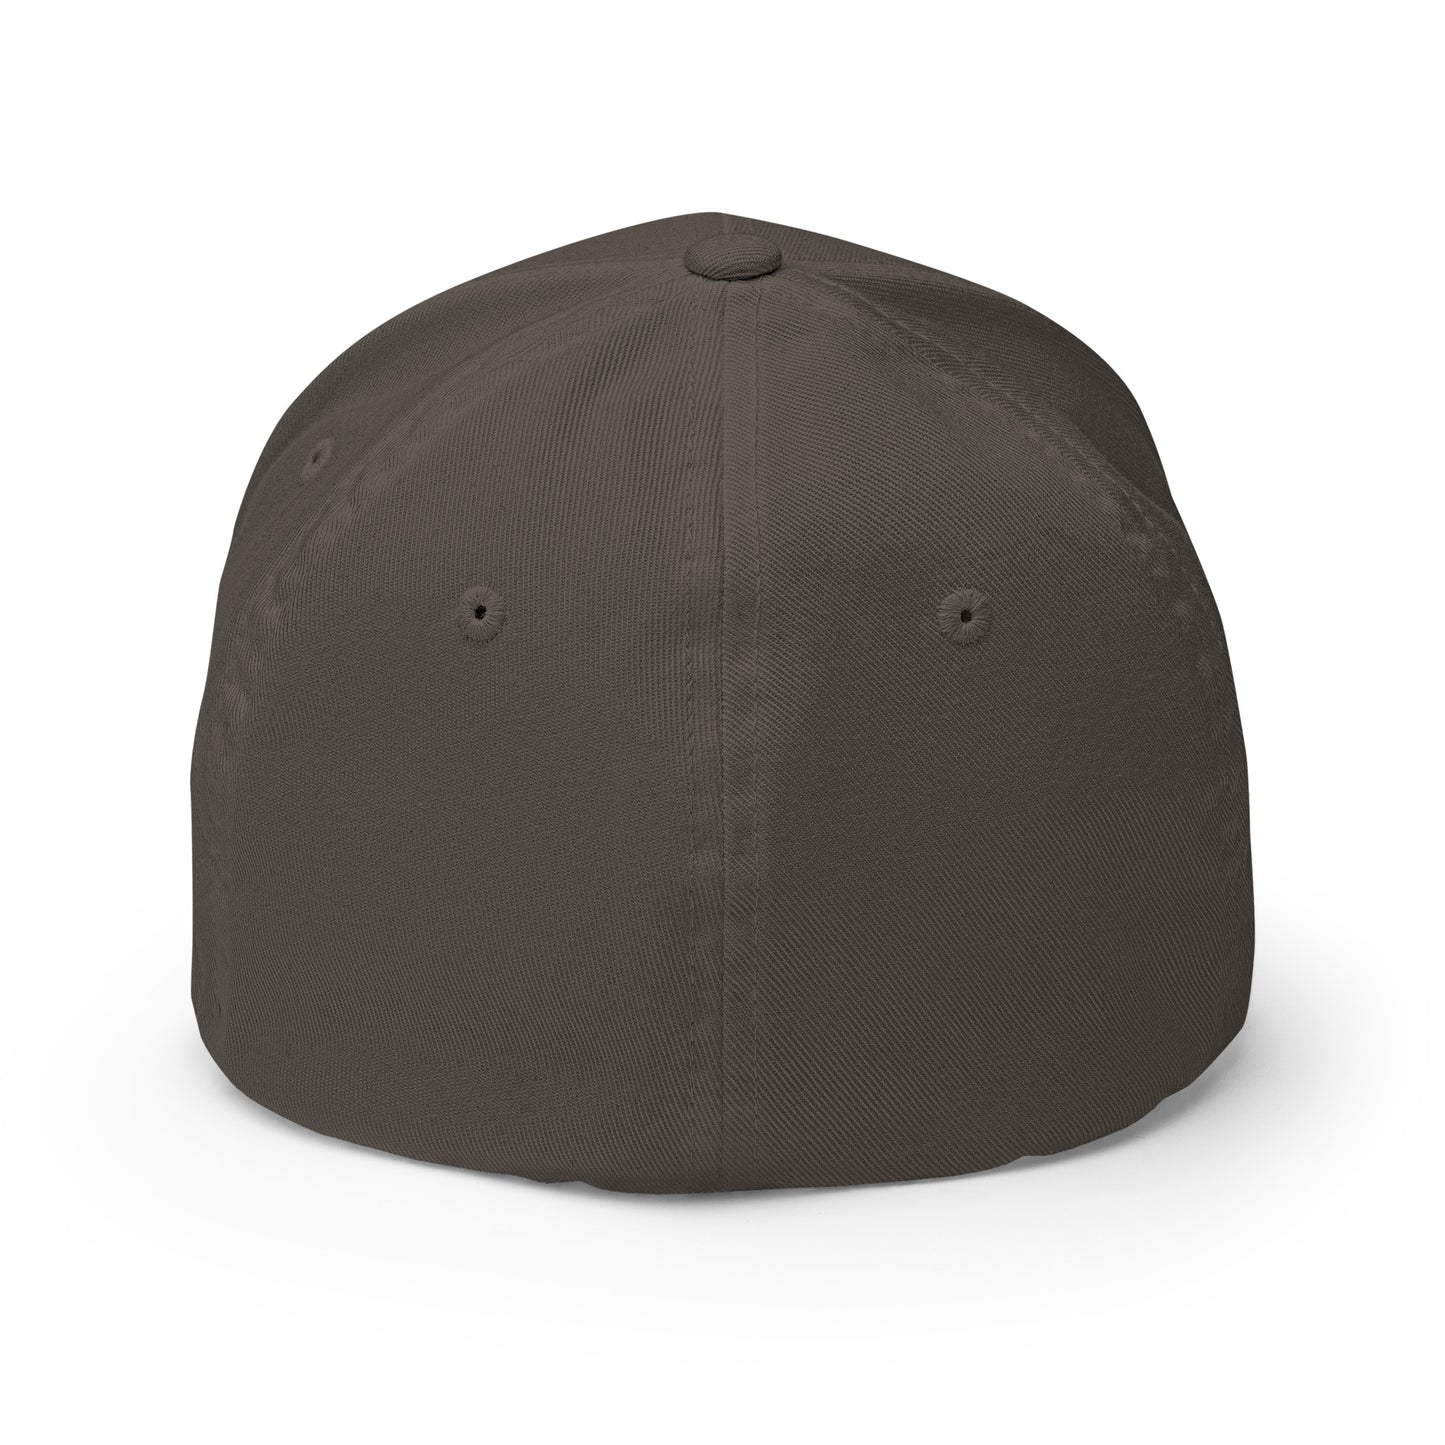 Pyramid Lake Brand | Fitted Twill Cap